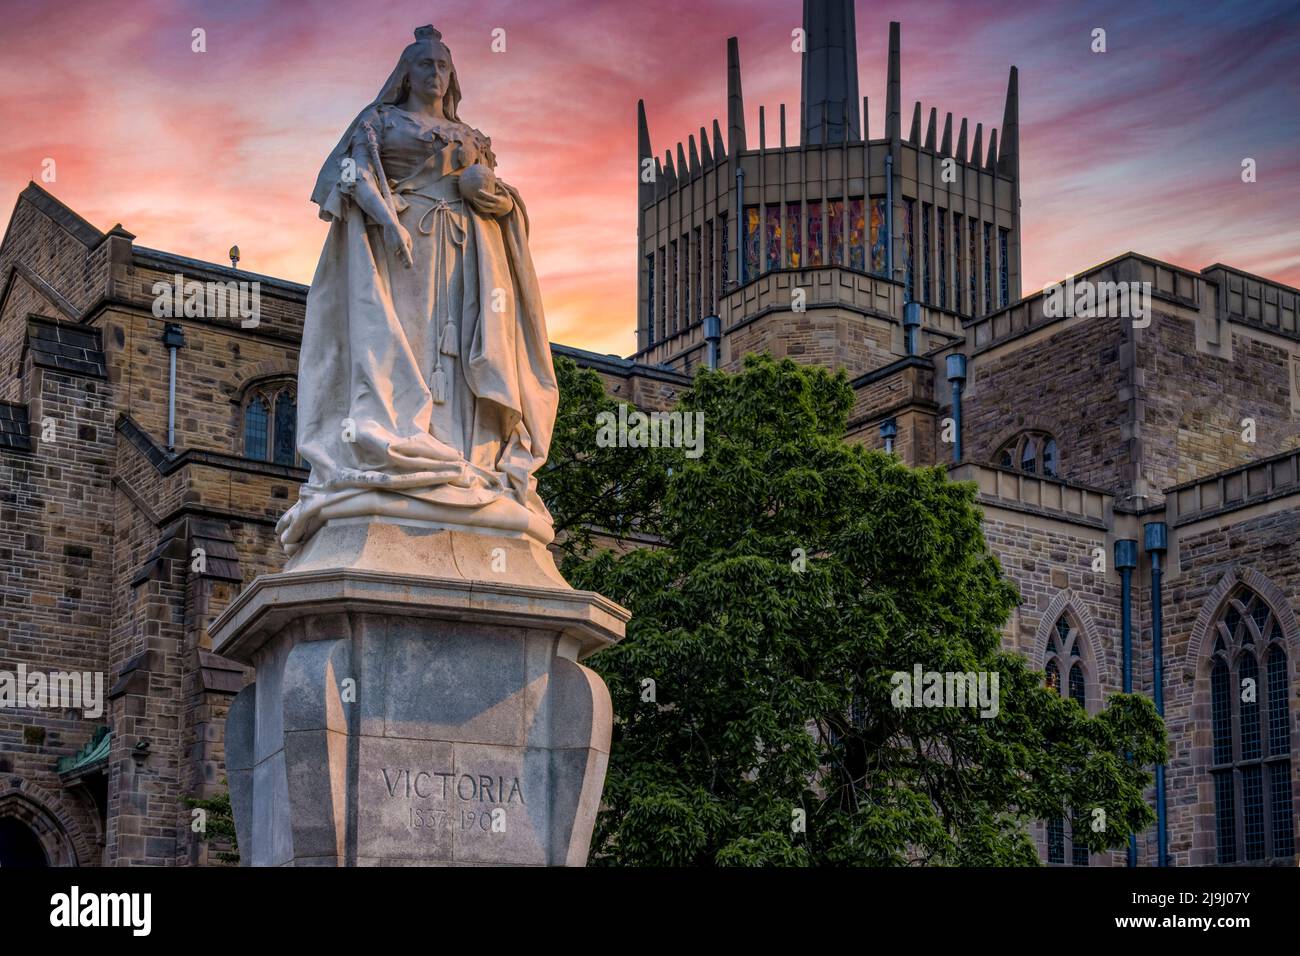 Blackburn Cathedral with Queen Victoria Statue at Sunset.  The statue is a Grade II listed monument located at Blackburn, Lancashire, UK. Stock Photo